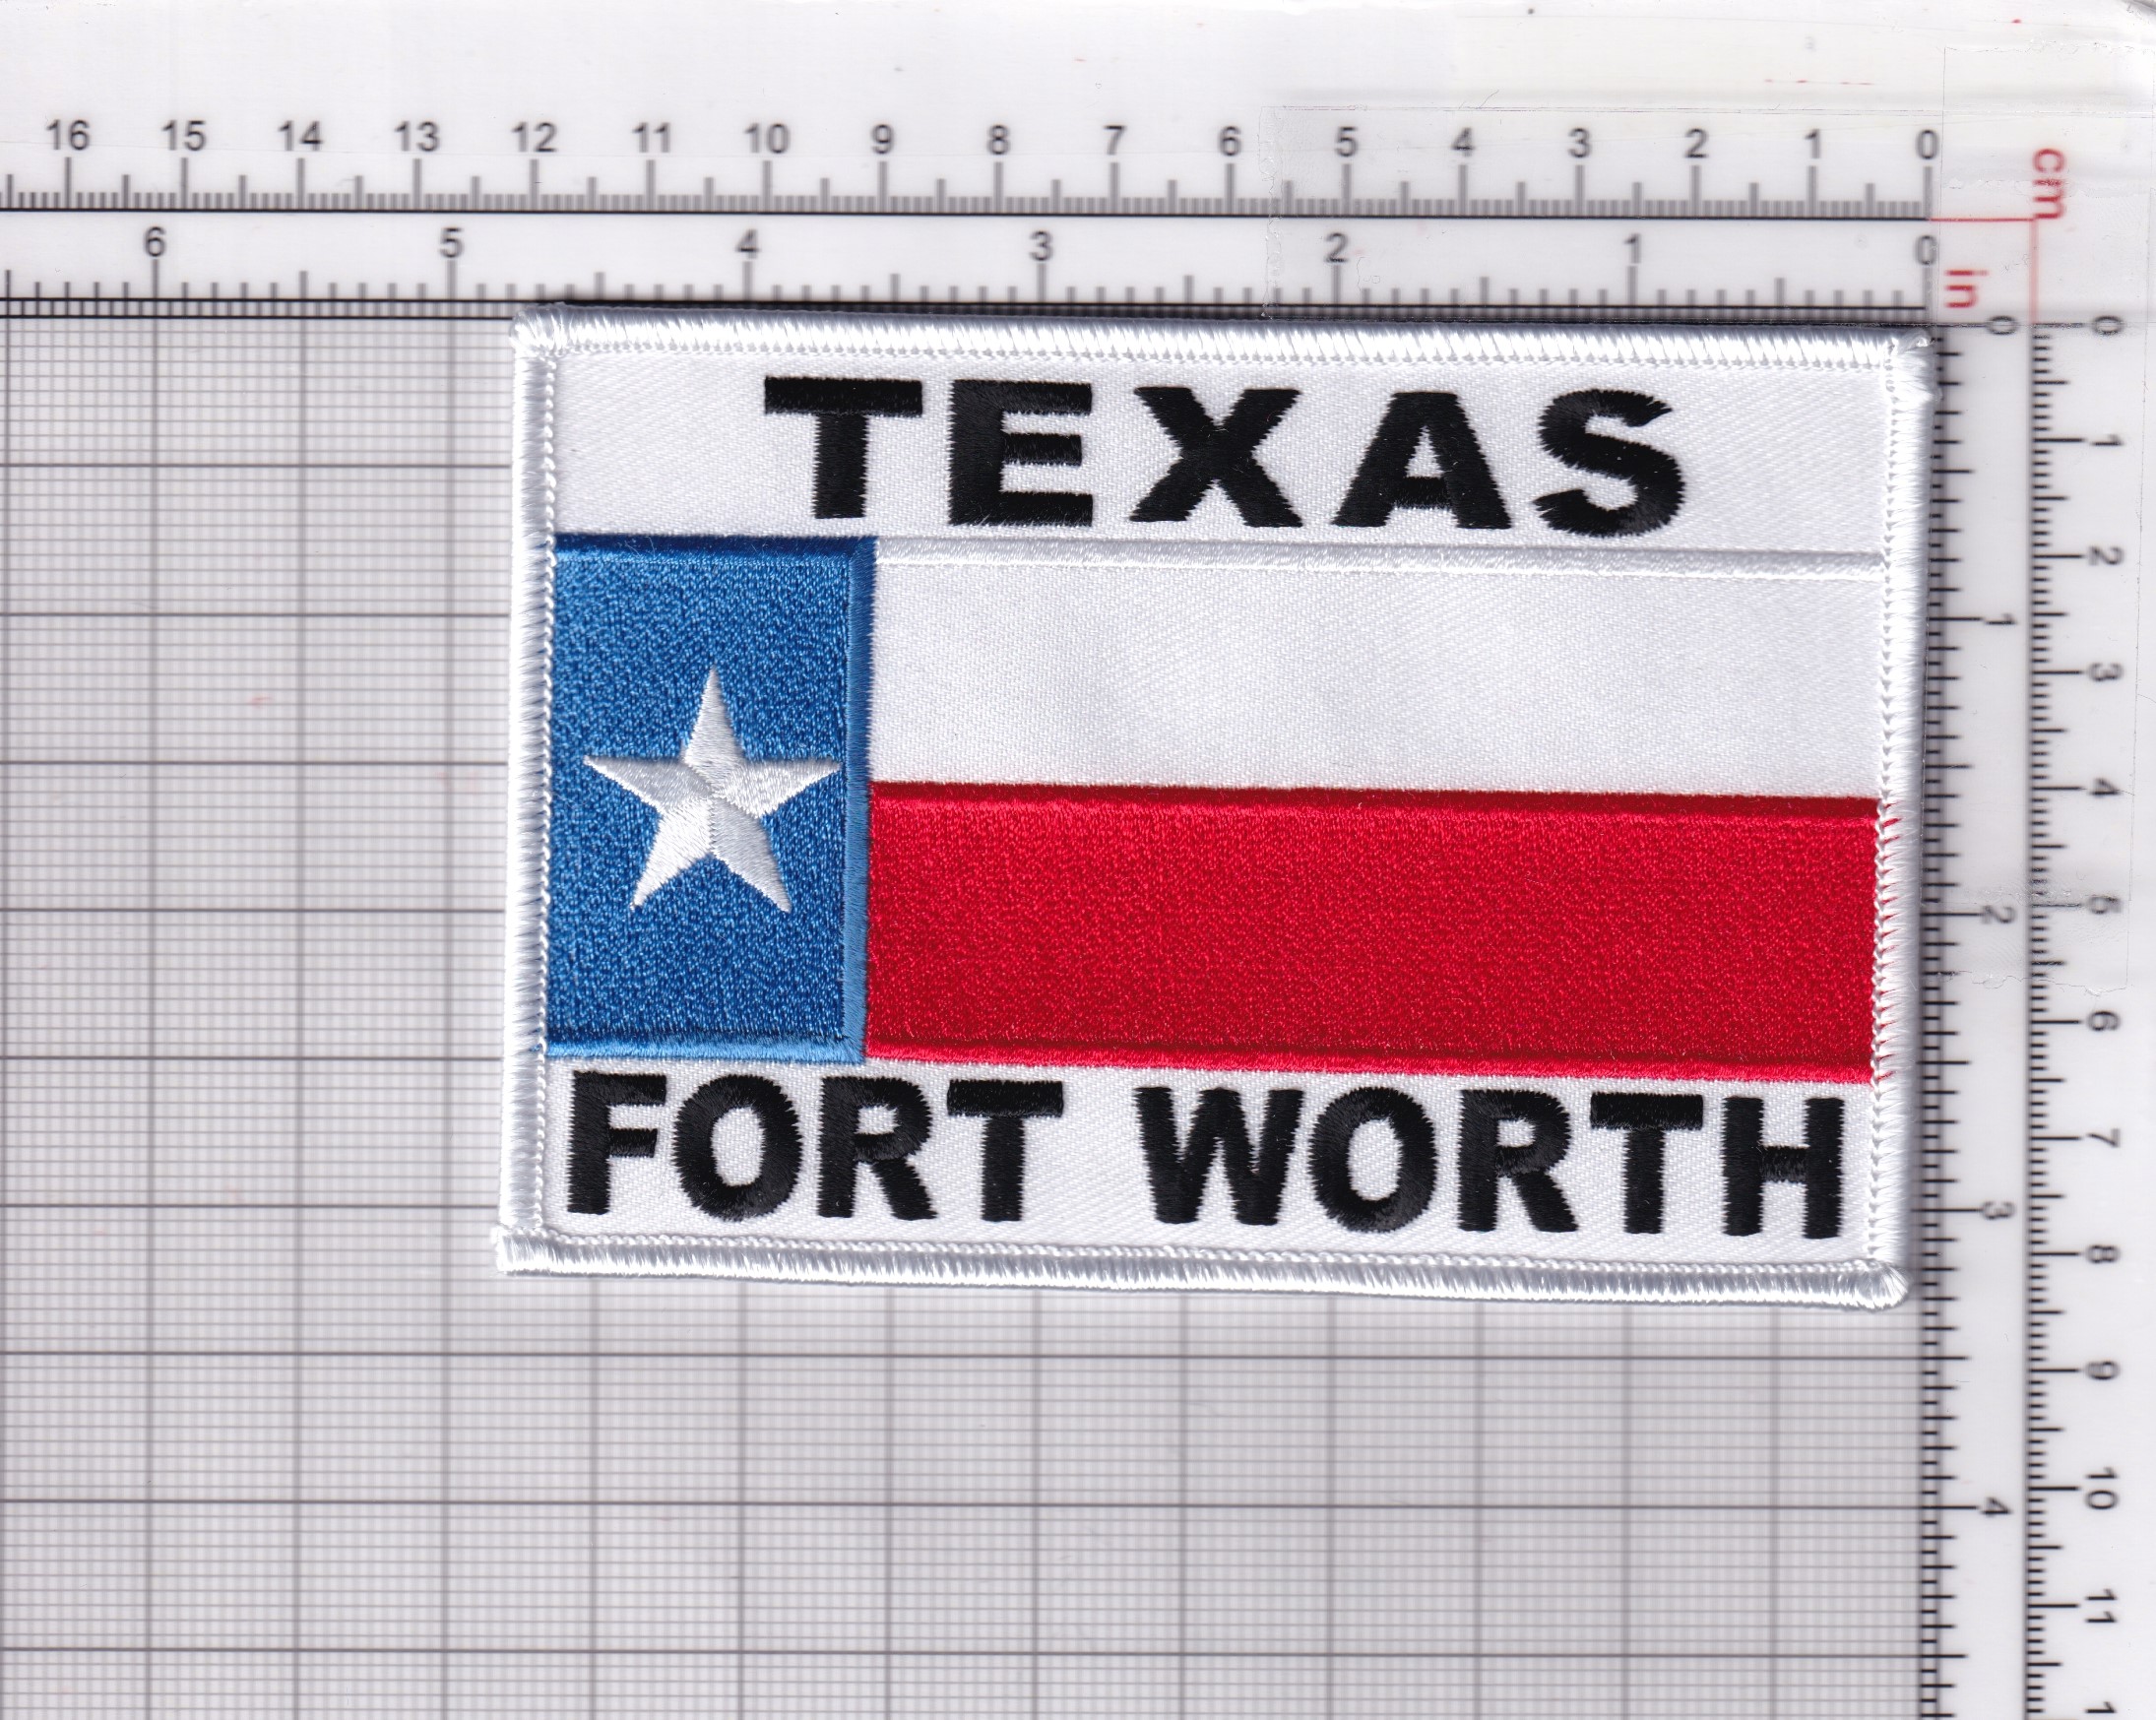 Fort Worth, Texas Patch